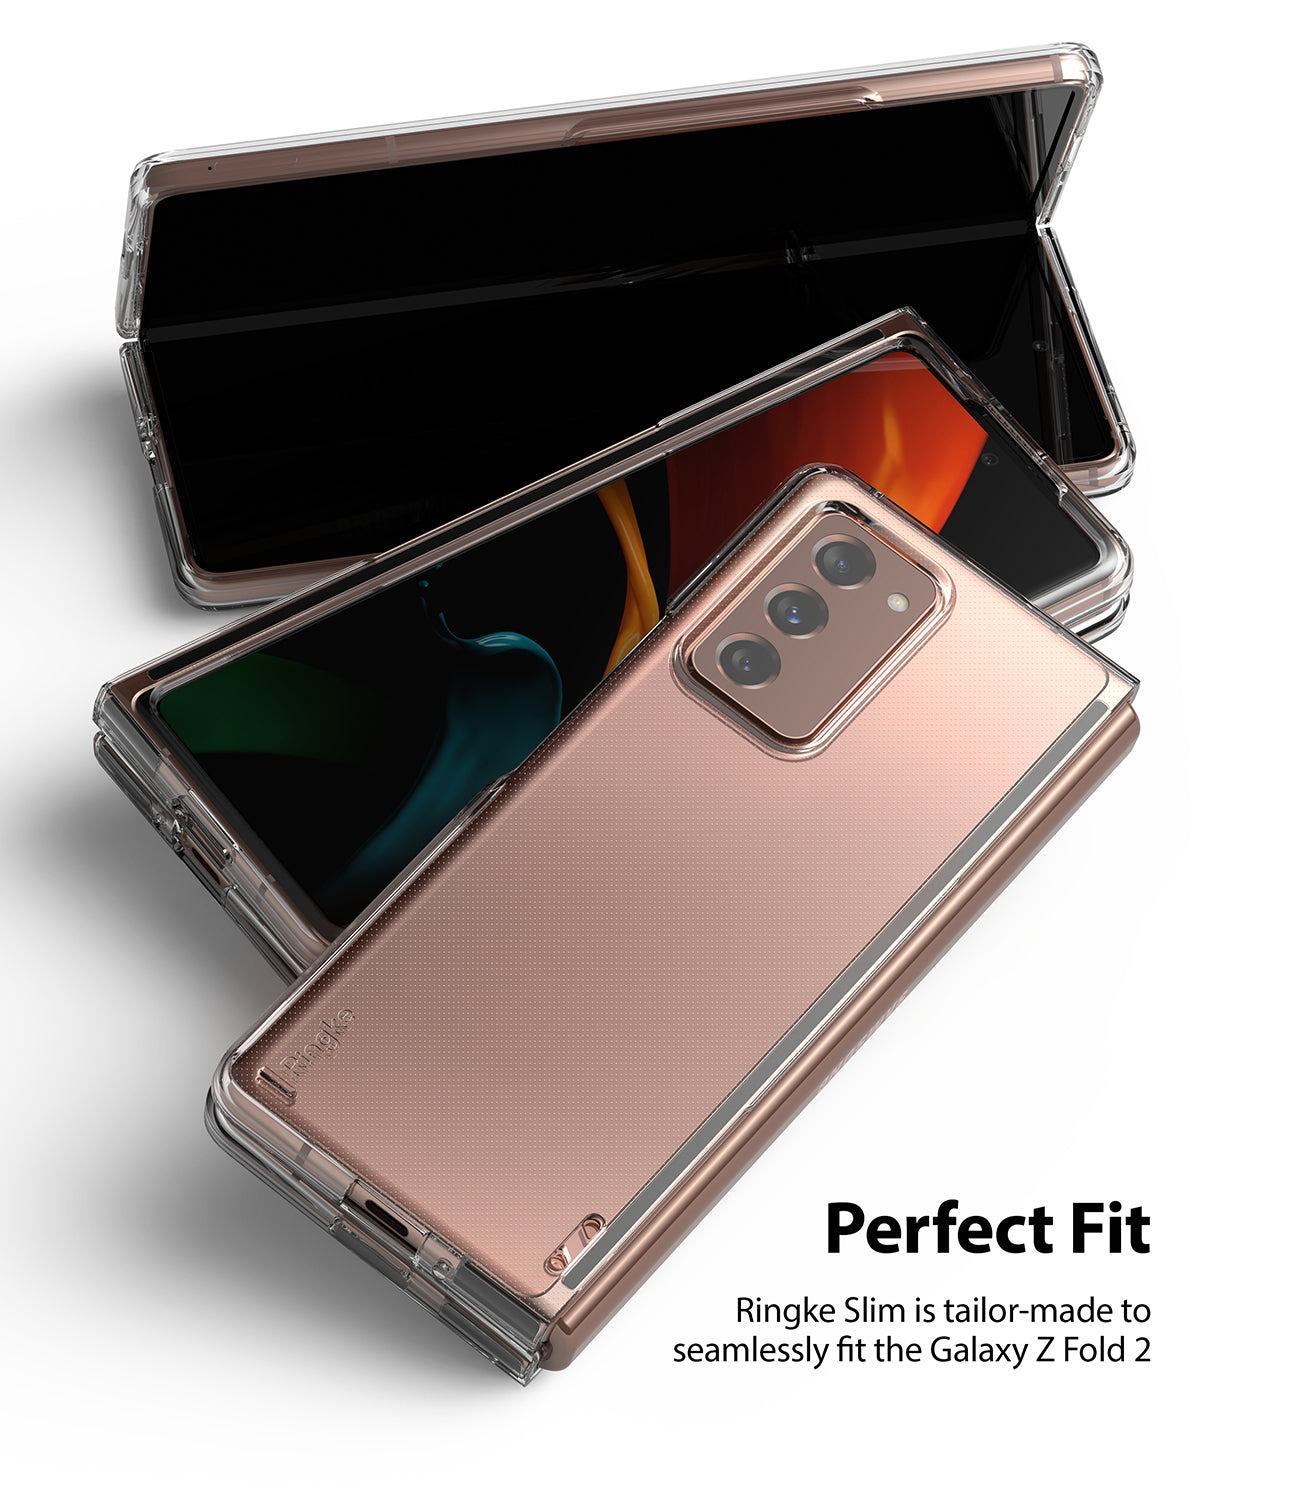 tailor made to fit seamlessly fit the galaxy z fold 2